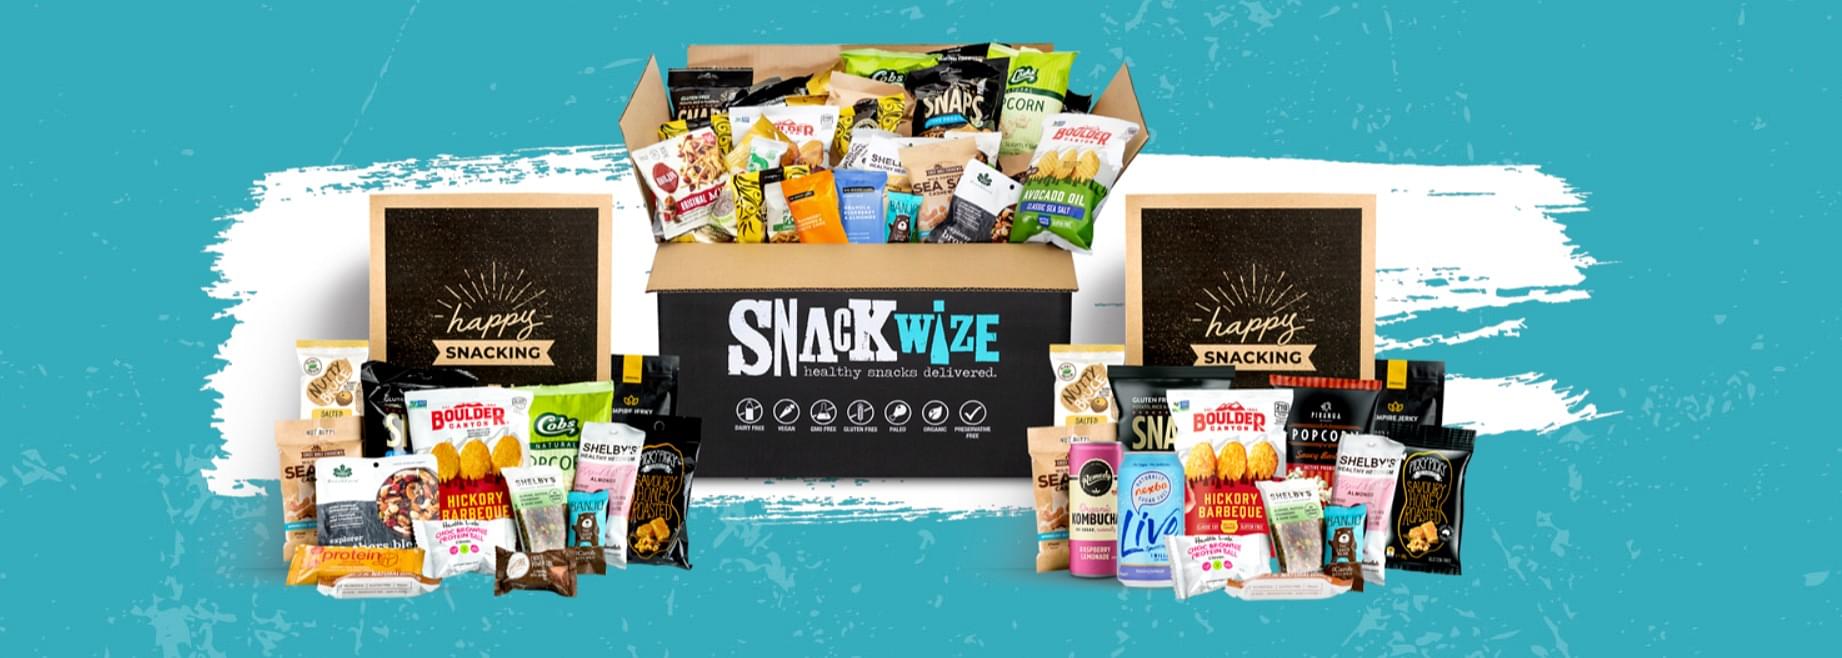 Snackwize